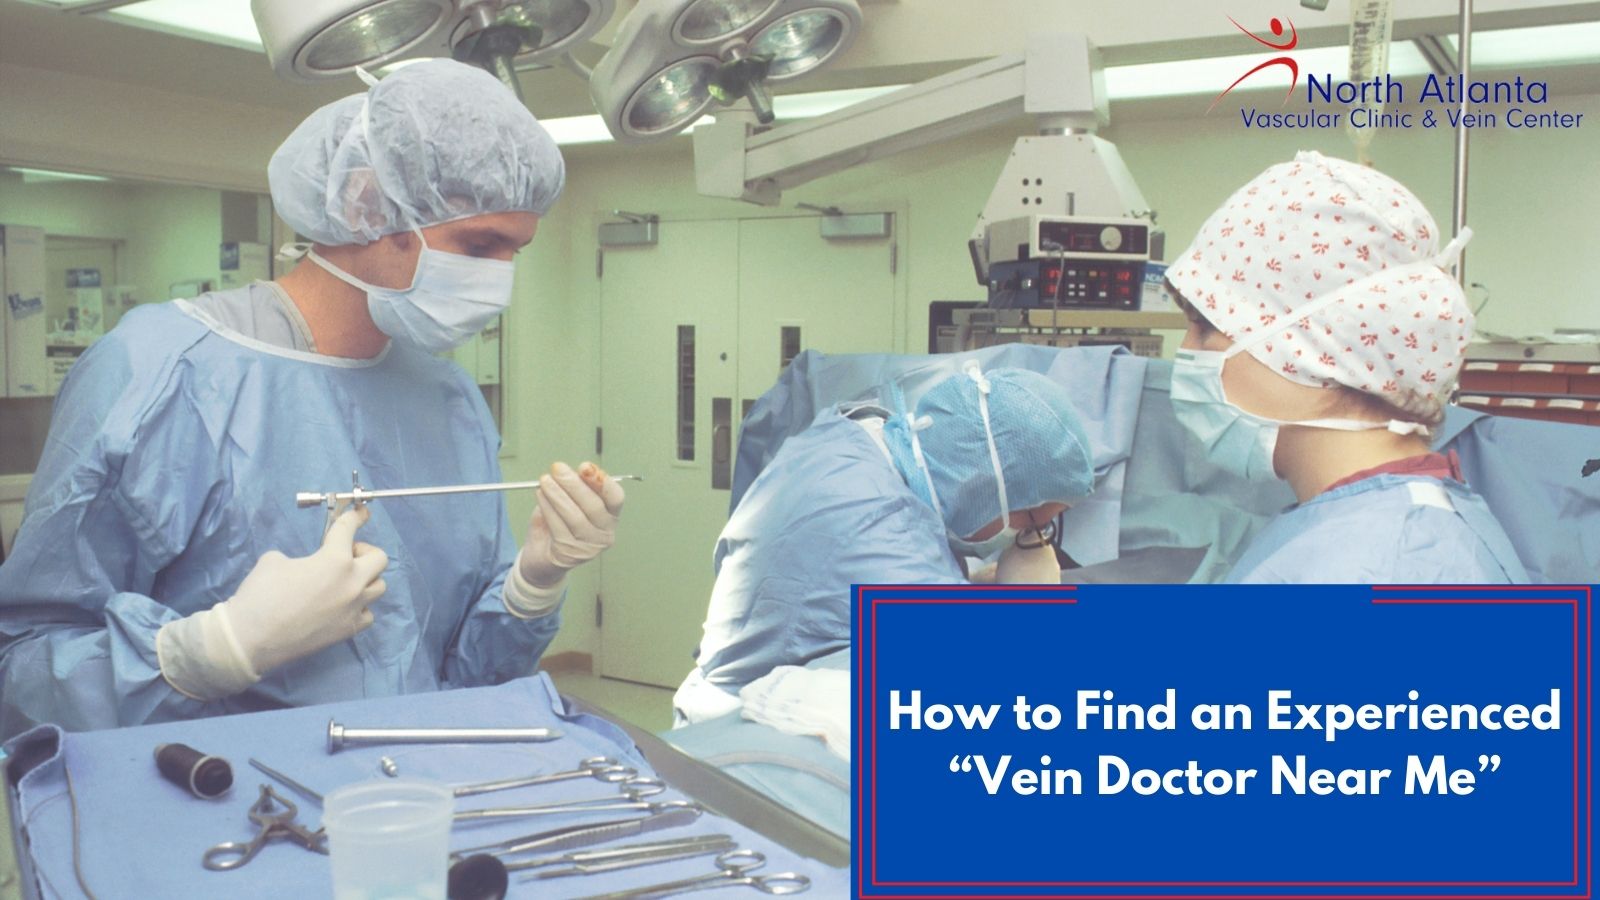 How to Find an Experienced "Vein Doctor Near Me"